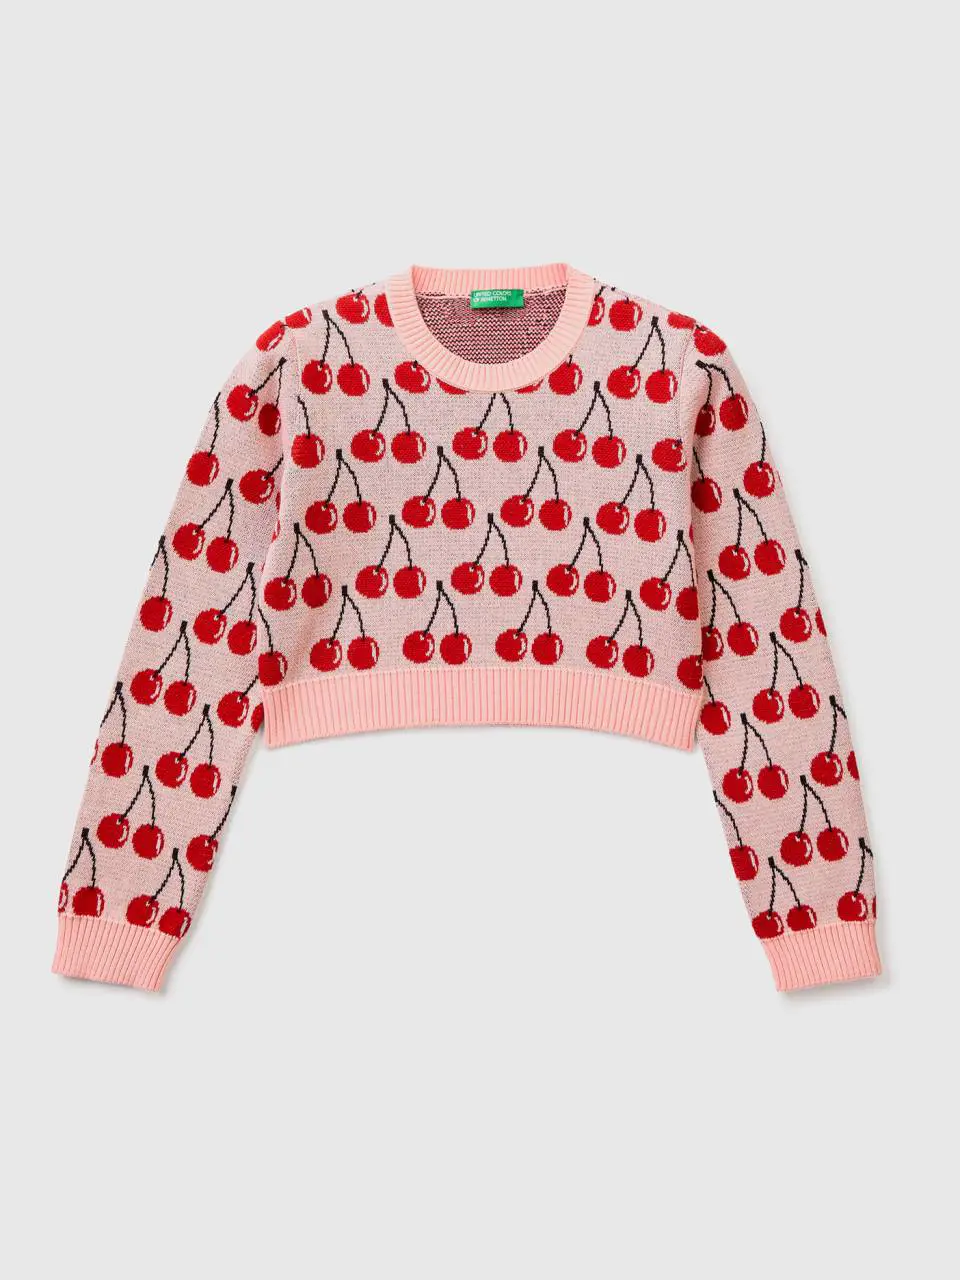 Benetton pink cropped sweater with cherry pattern. 1